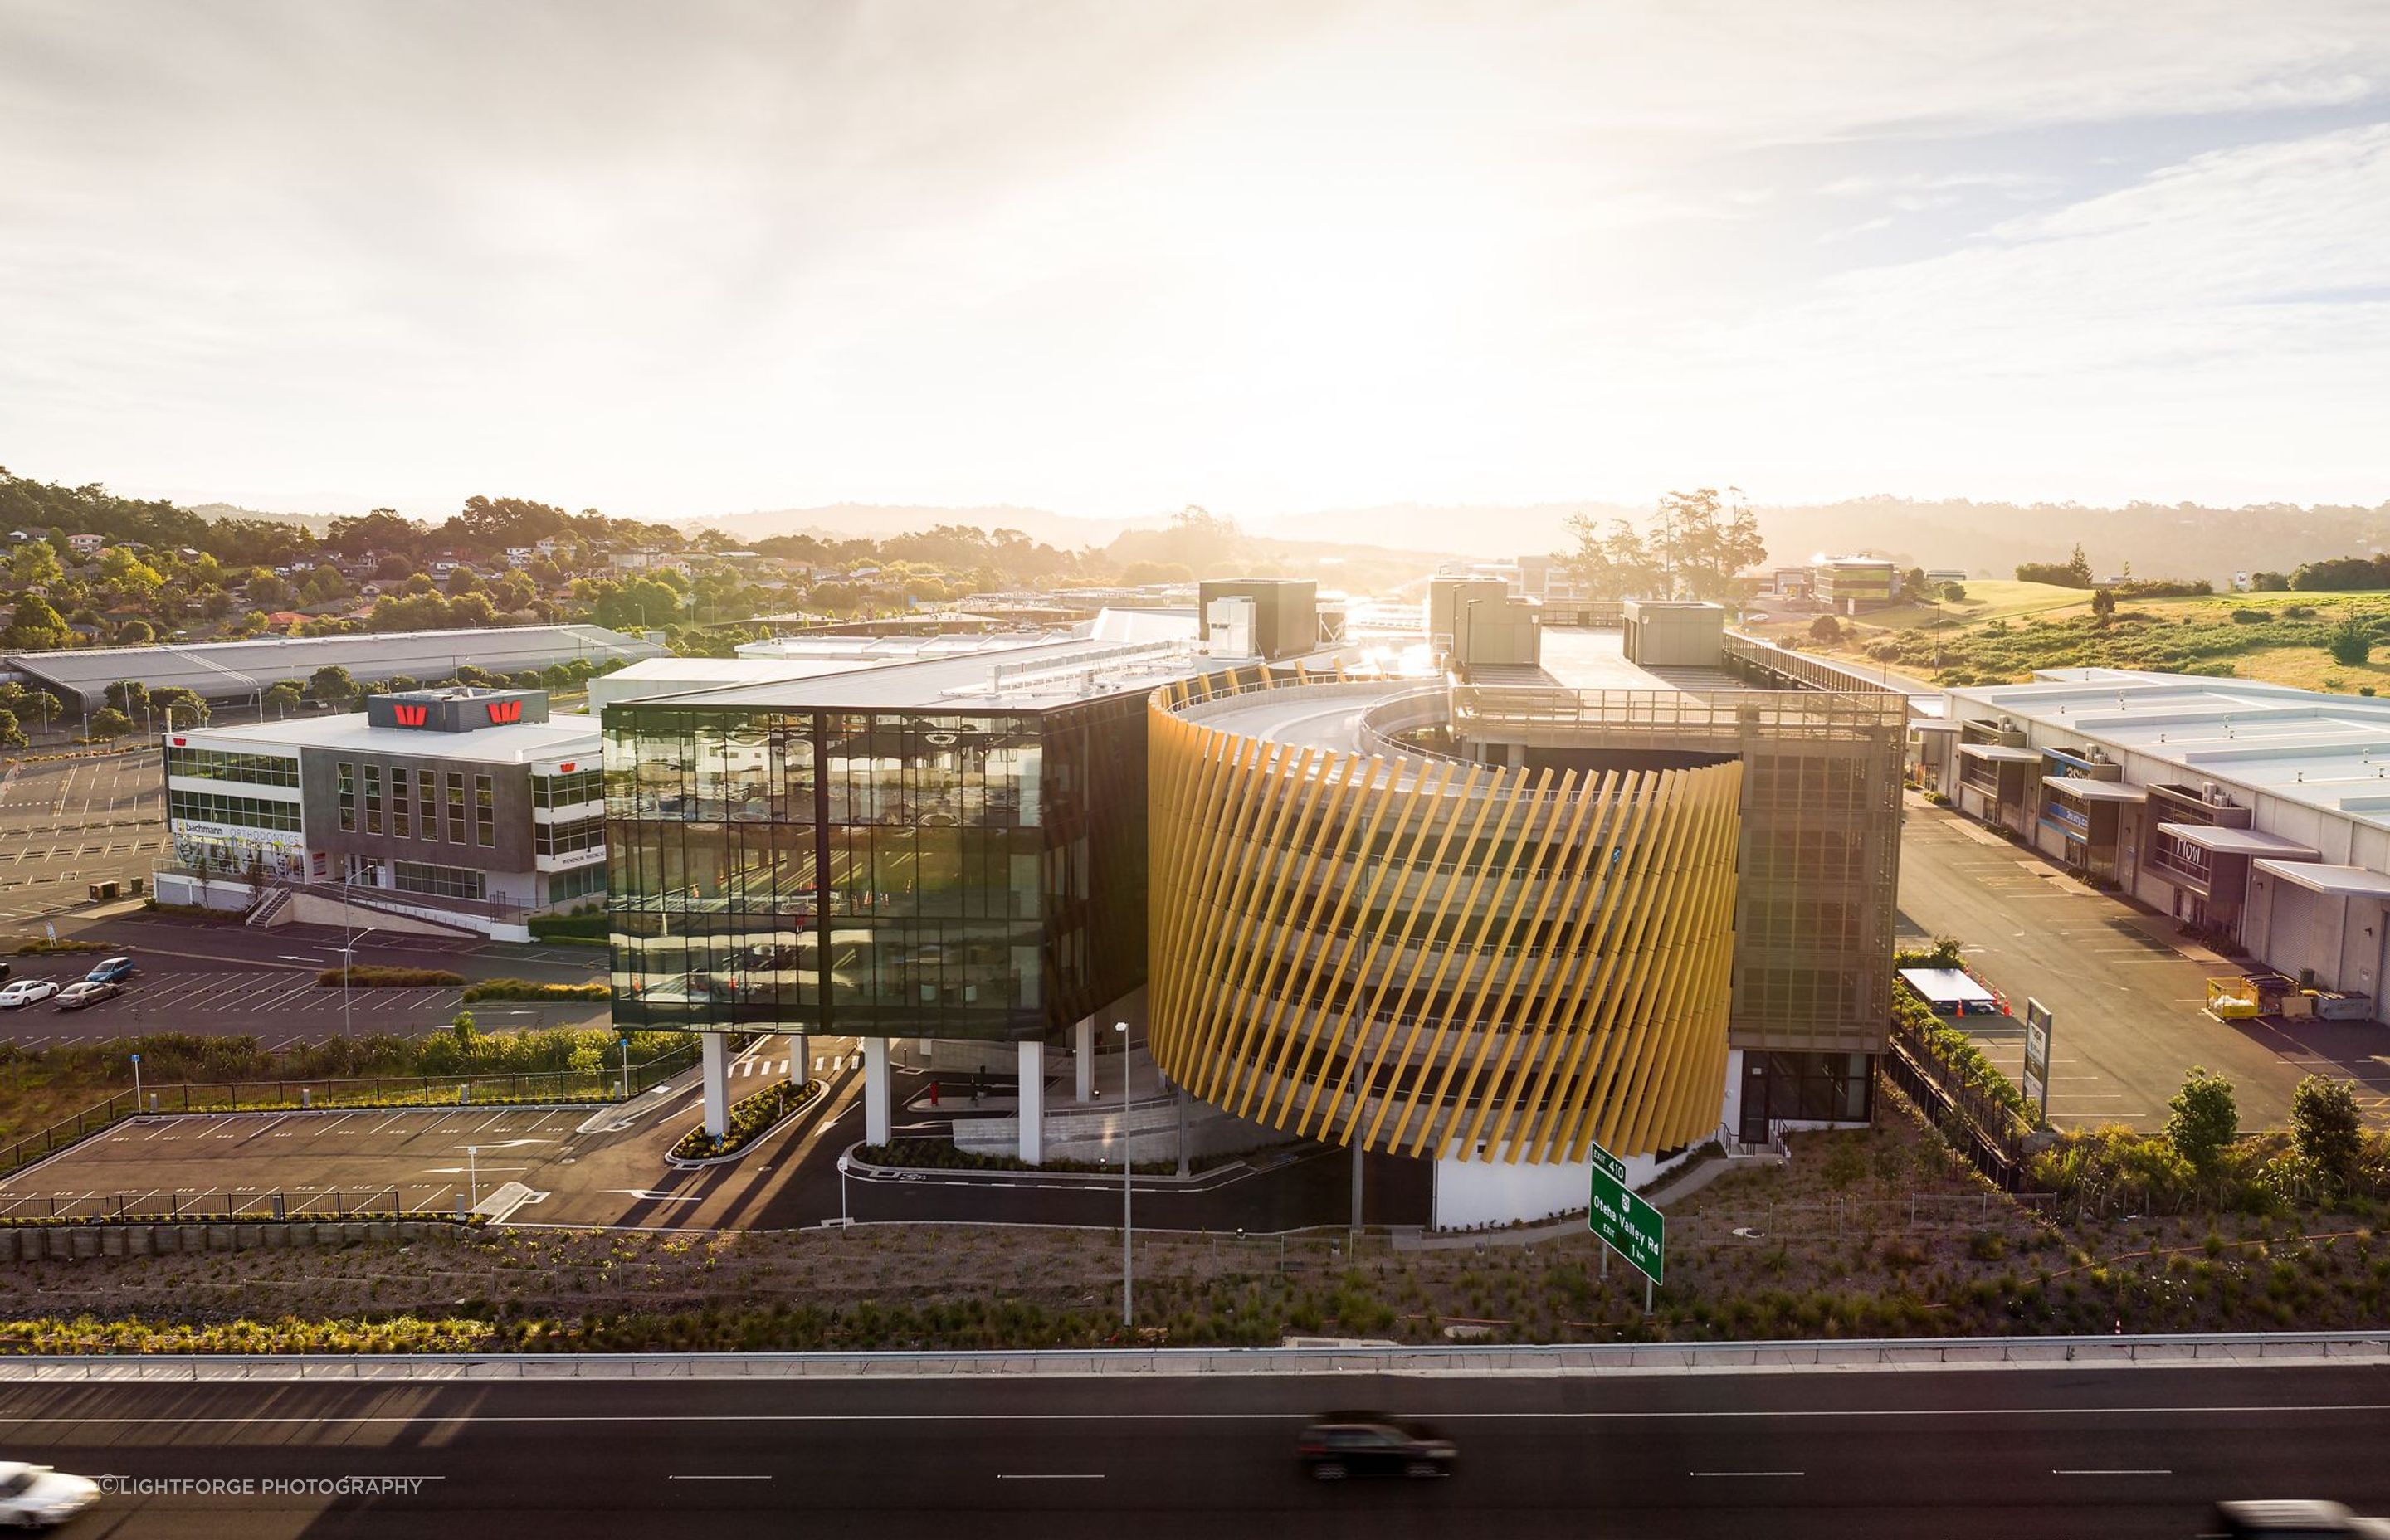 Seen from the Northern Motorway, the huge expanse of glazing and the gold fins on the spiraling car parking ramp mean 55 Corinthian Drive has become a landmark.